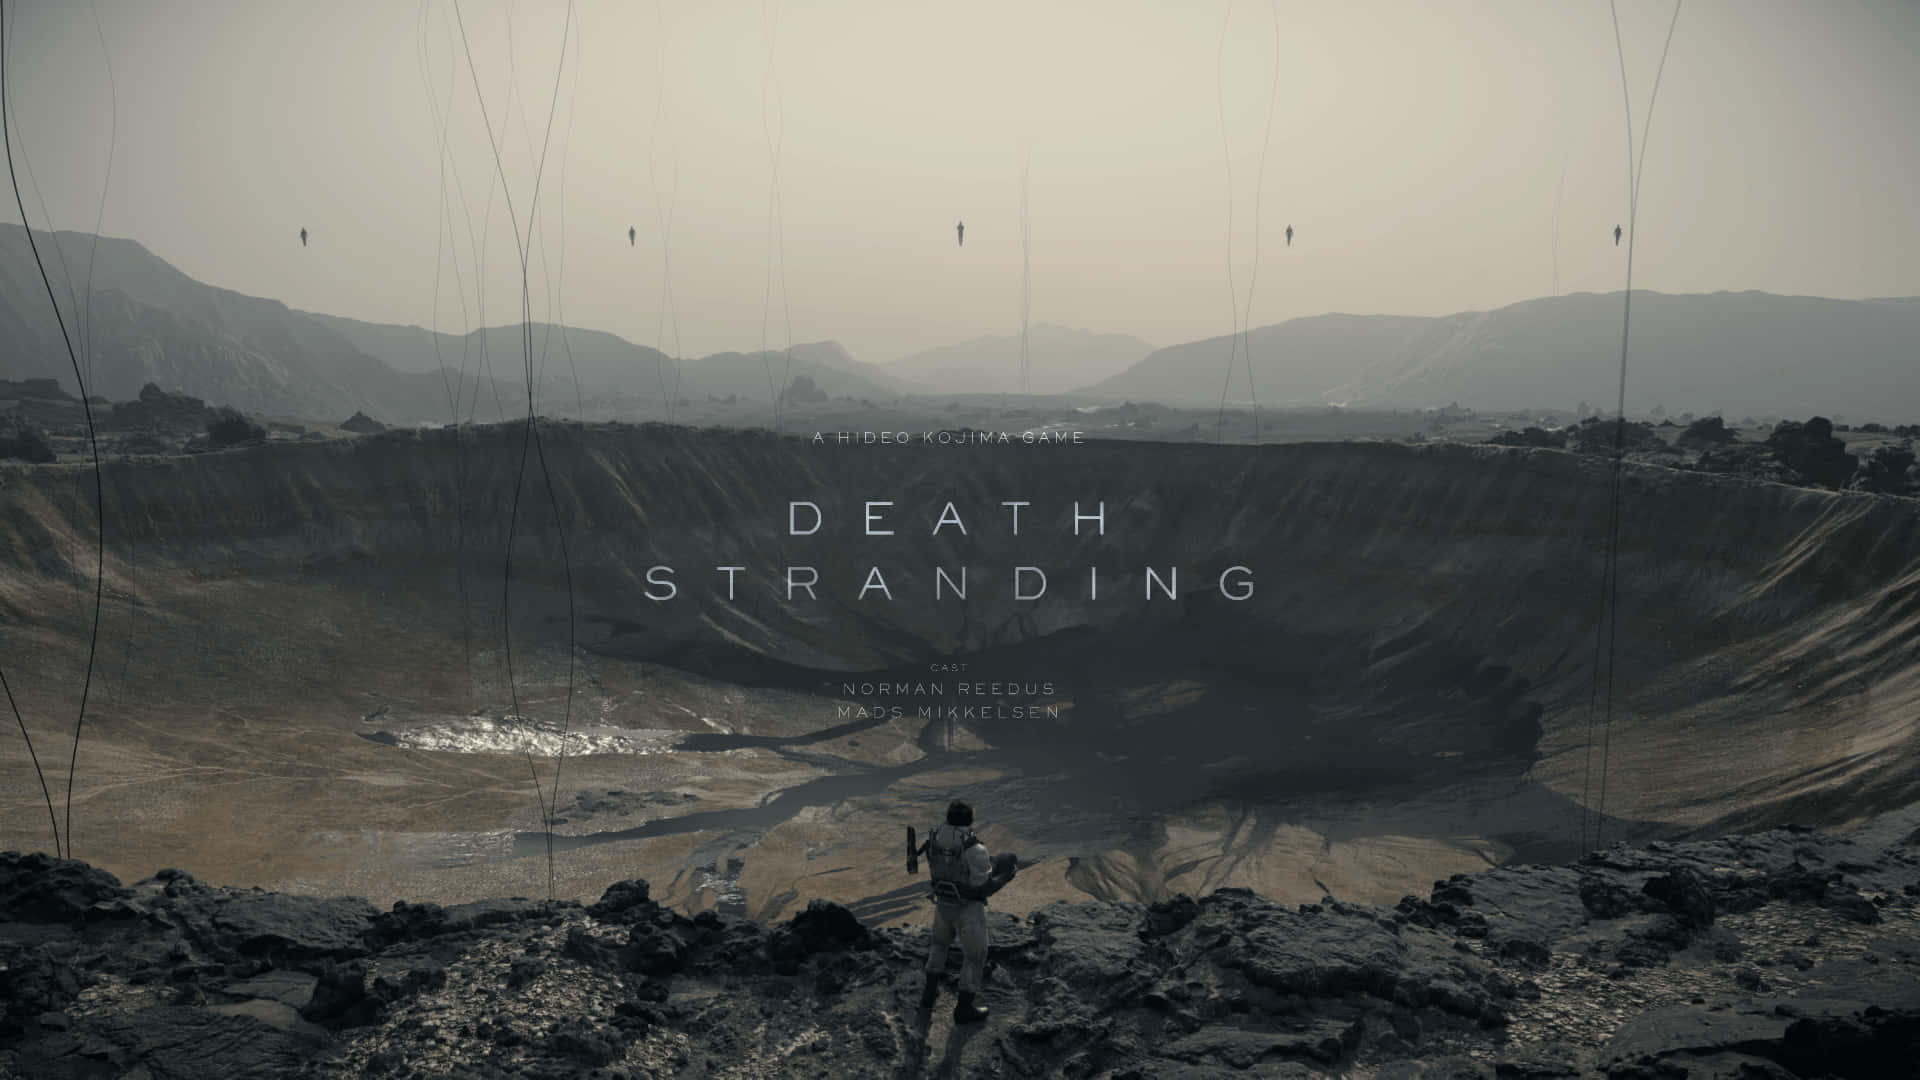 "Travel the Expanse in Death Stranding"